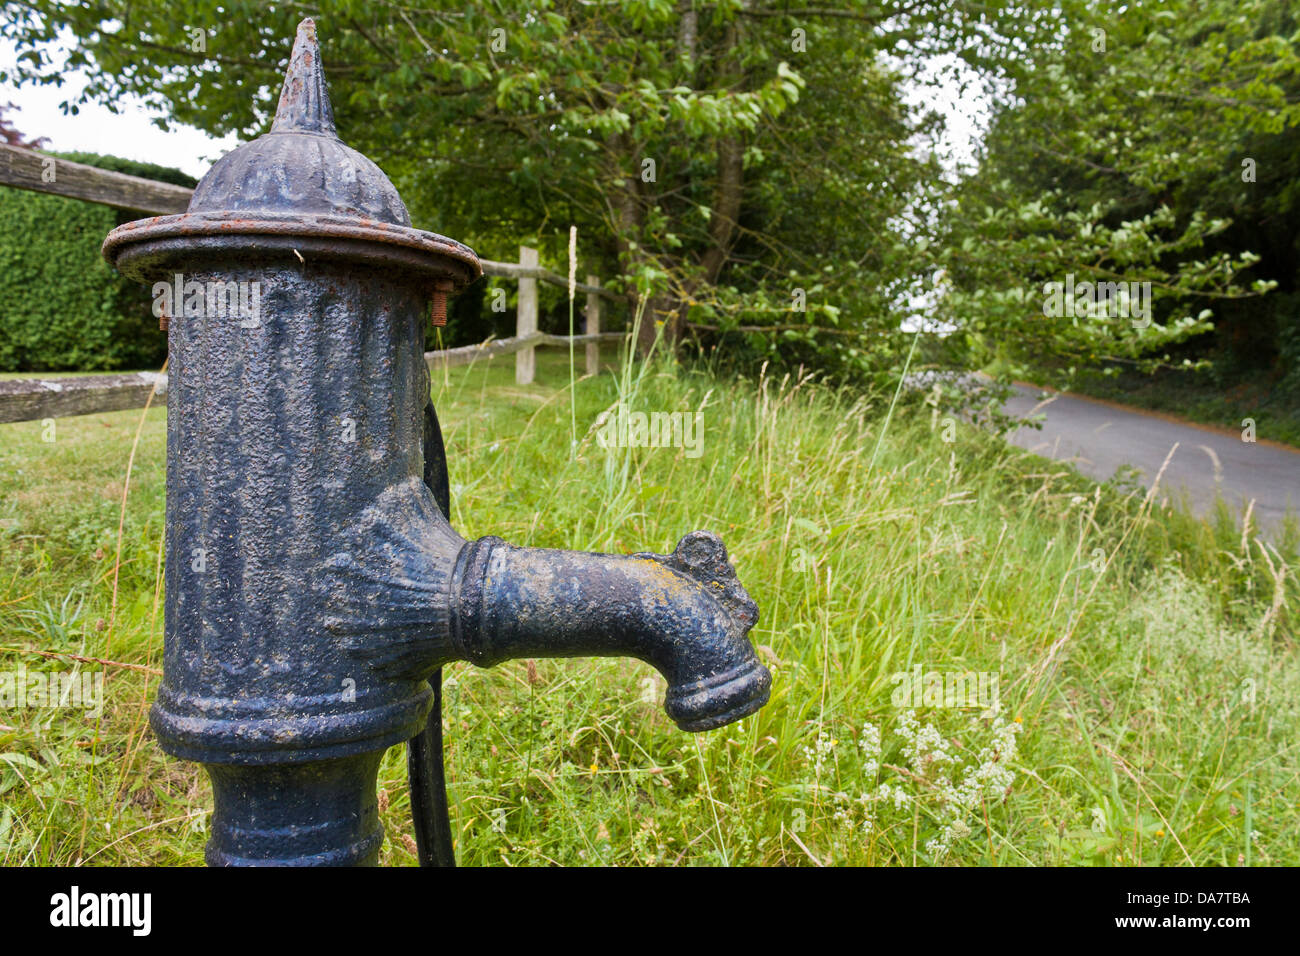 An Old Fashioned Cast Iron Water Pump In The Village Of Aldworth truly Old Fashioned Water Pump for reference